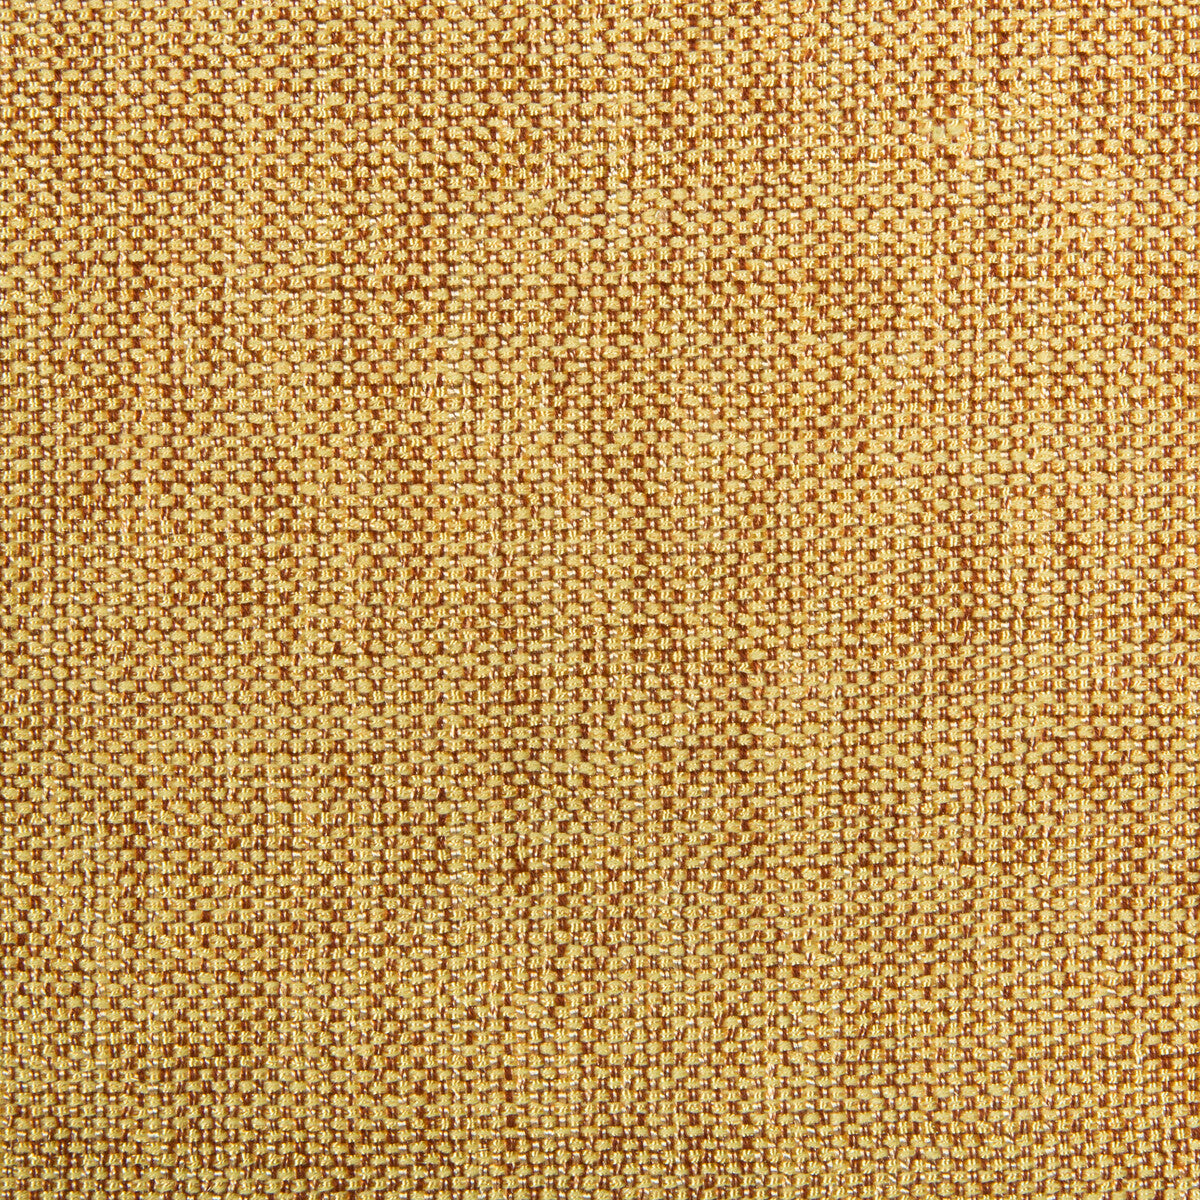 Kravet Contract fabric in 34926-1424 color - pattern 34926.1424.0 - by Kravet Contract